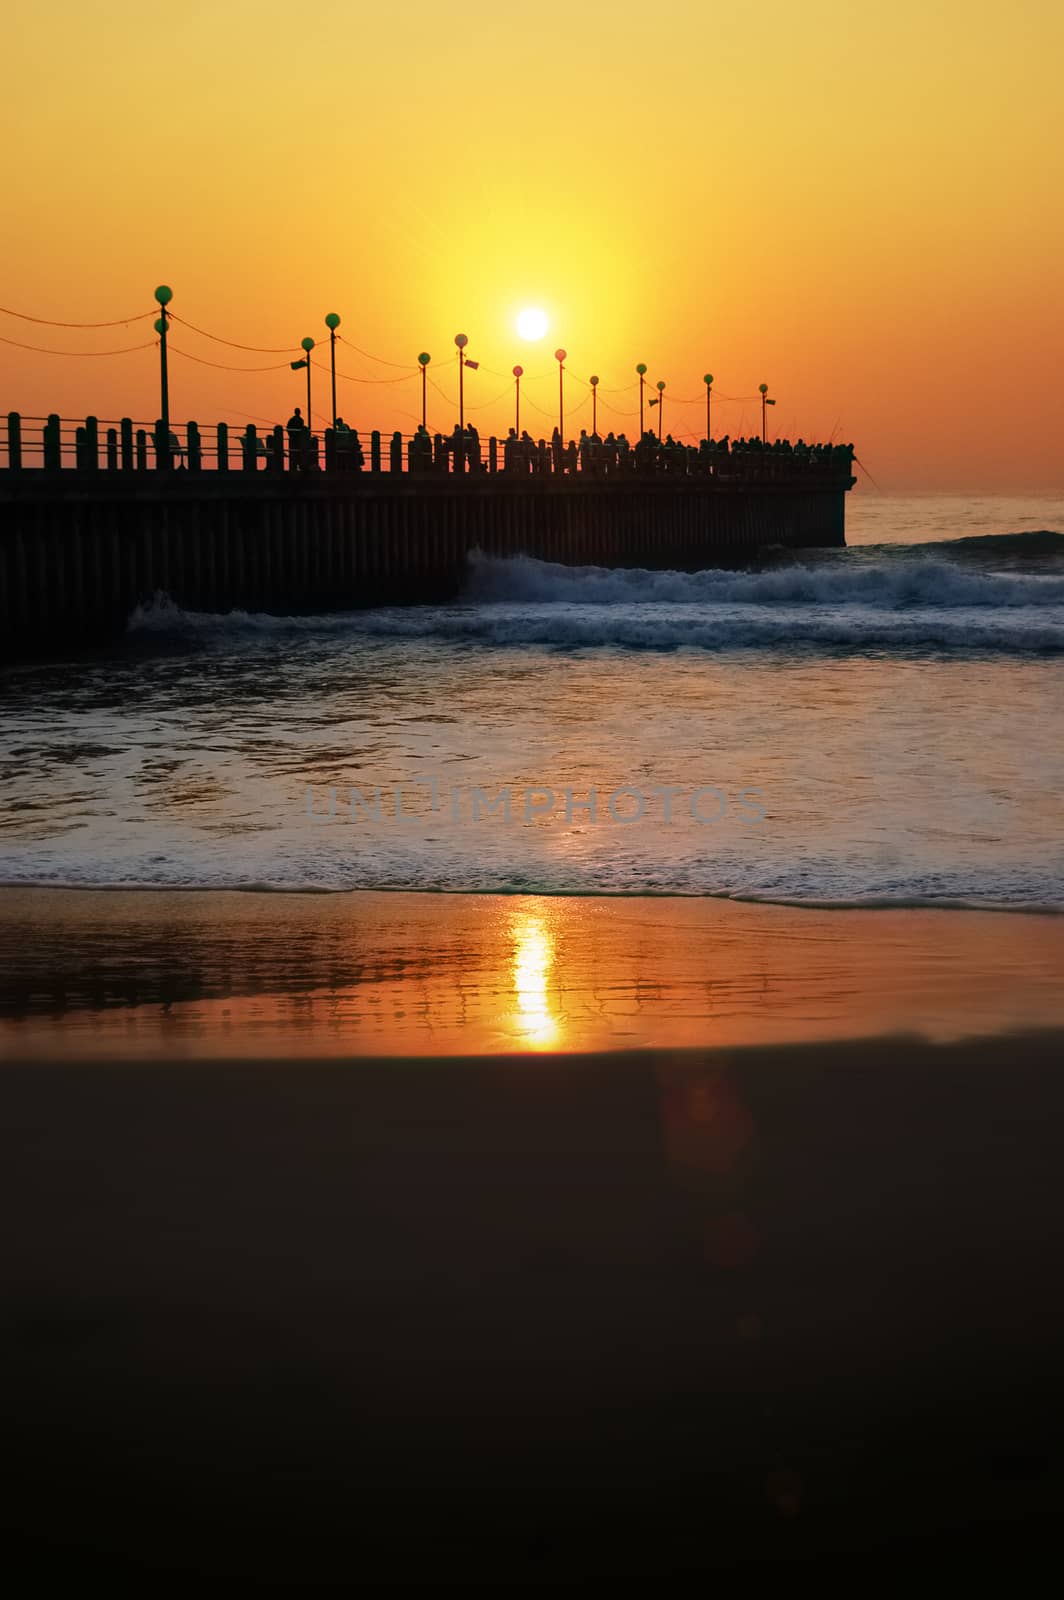 a Beatiful sunset over the pier of durban reflecting on ocean water